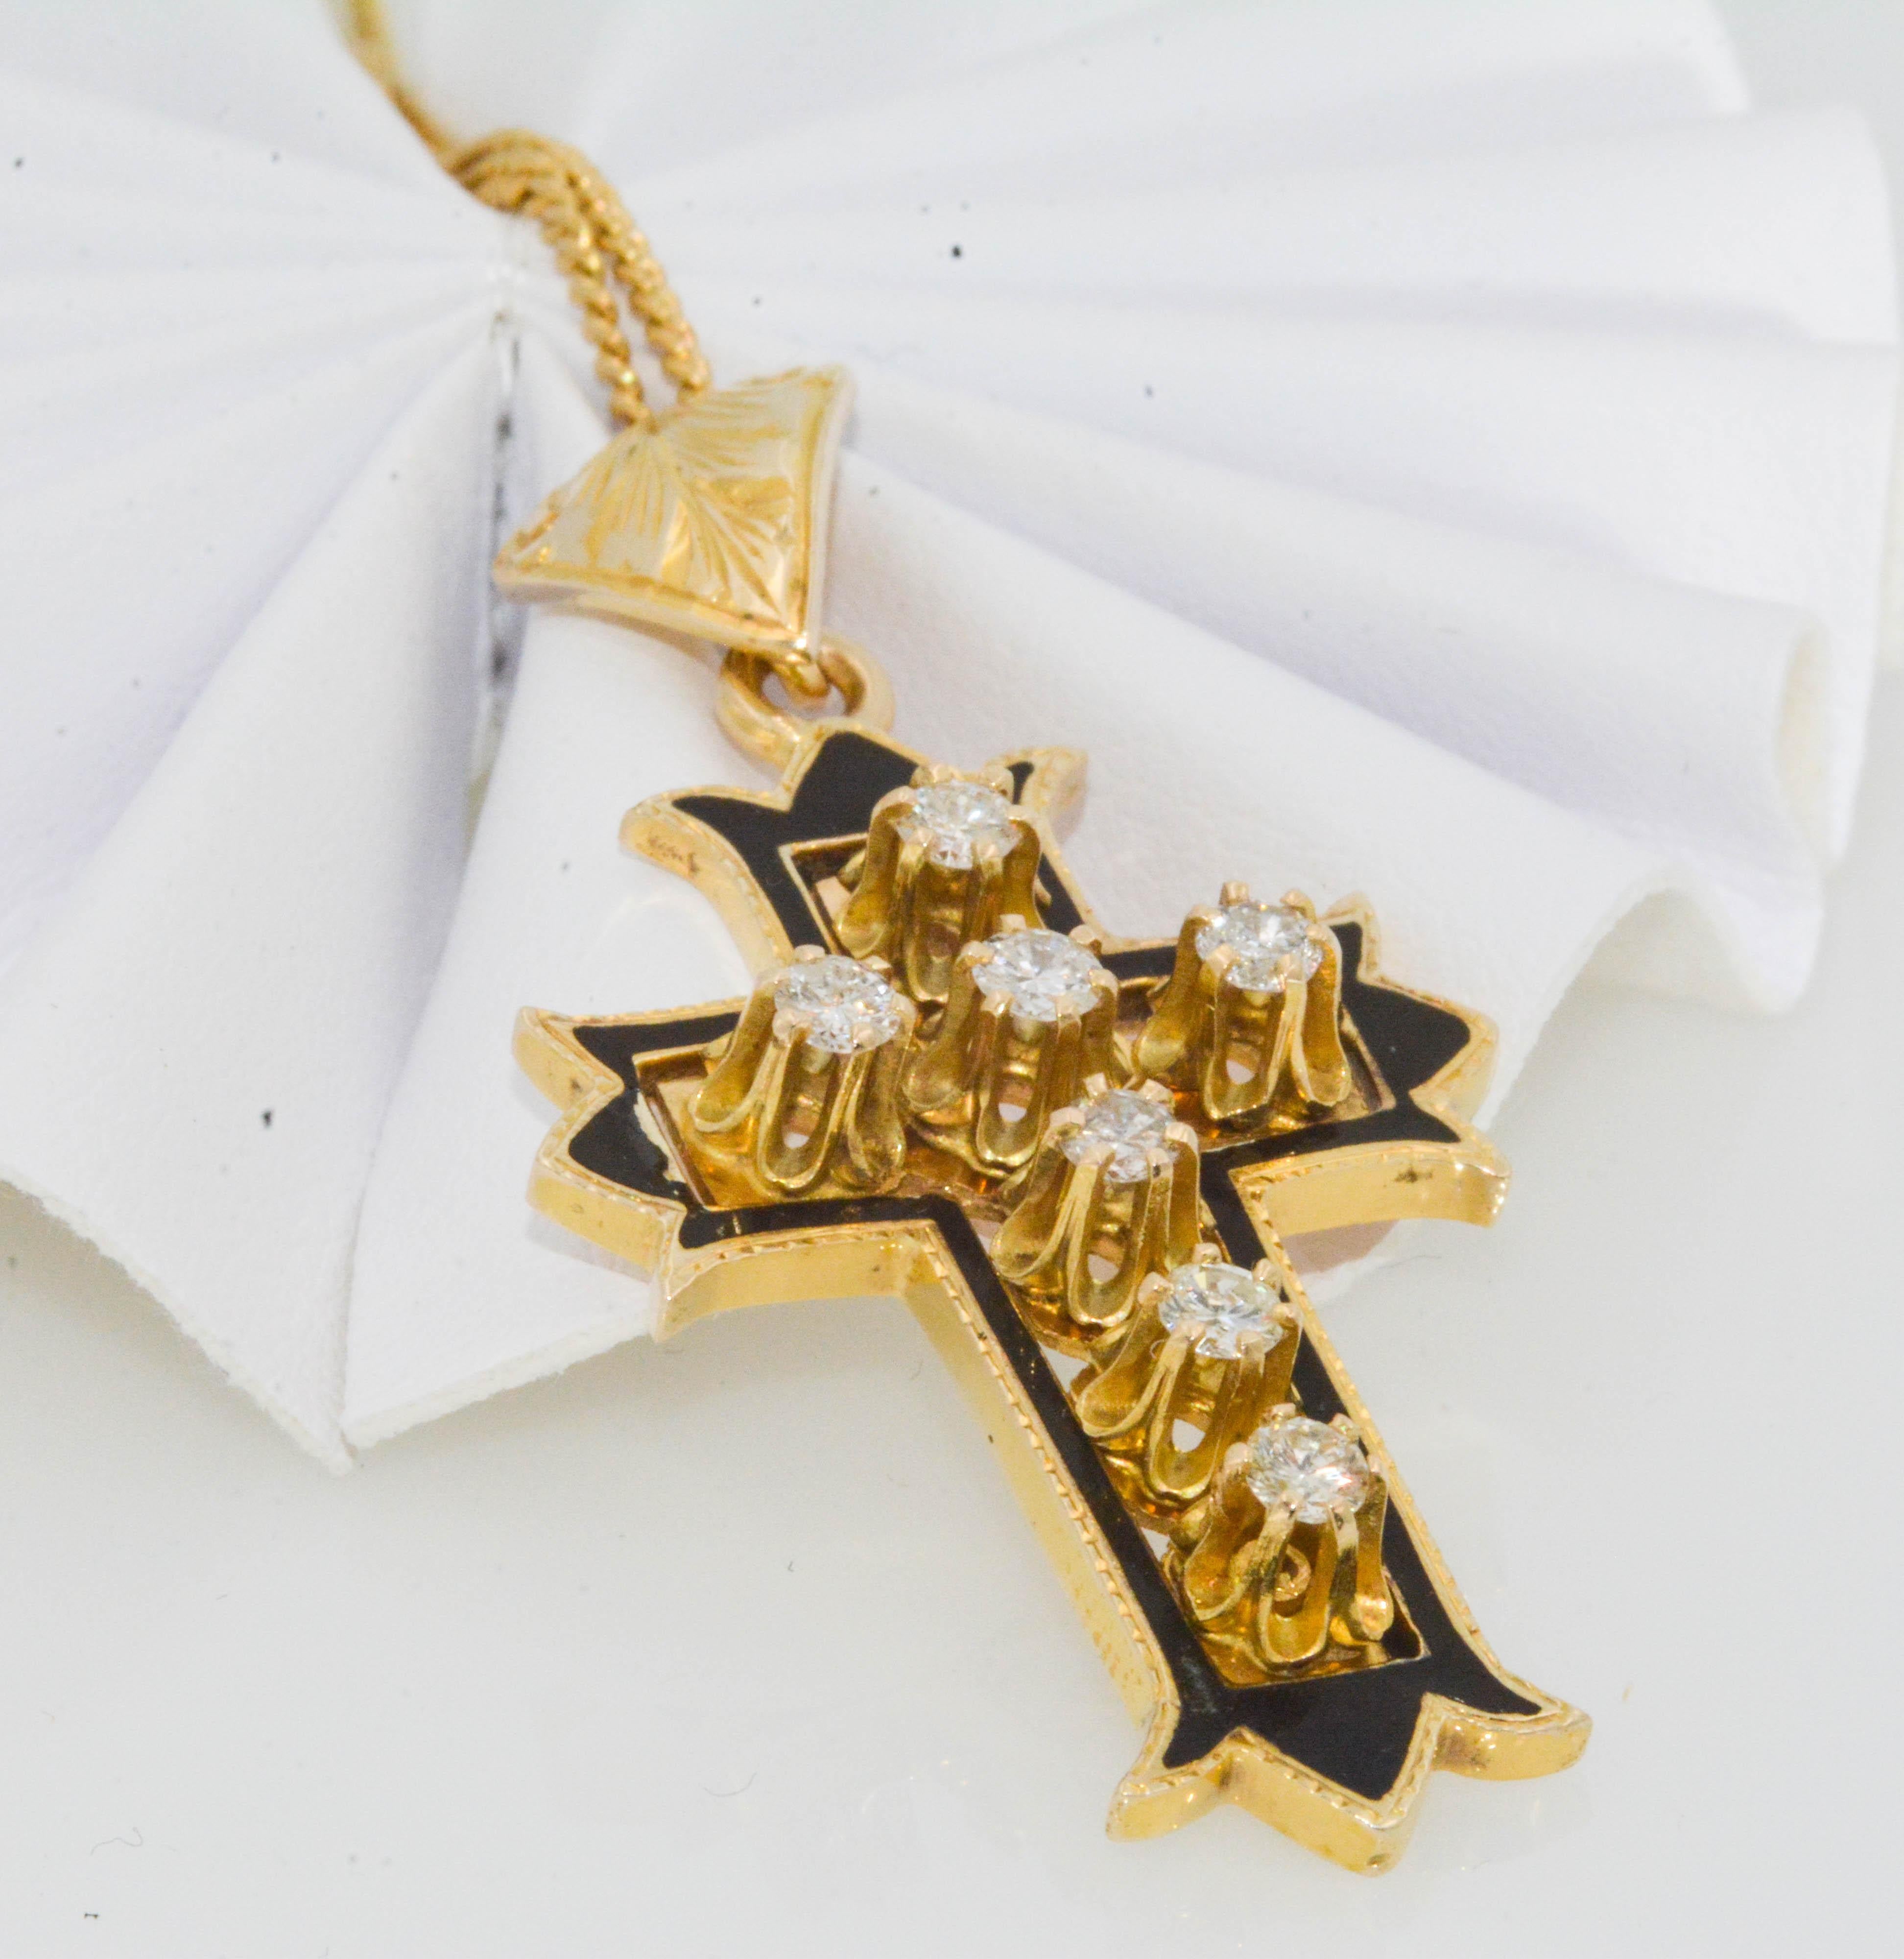 A lovely Circa 1920 Victorian diamond cross pendant. 14 karat yellow gold with black enamel tastefully surrounds 7 round brilliant cut diamonds 0.80 carat total weight (I color, I1 internal clarity). 18 inch 14 karat yellow gold chain. Notice the